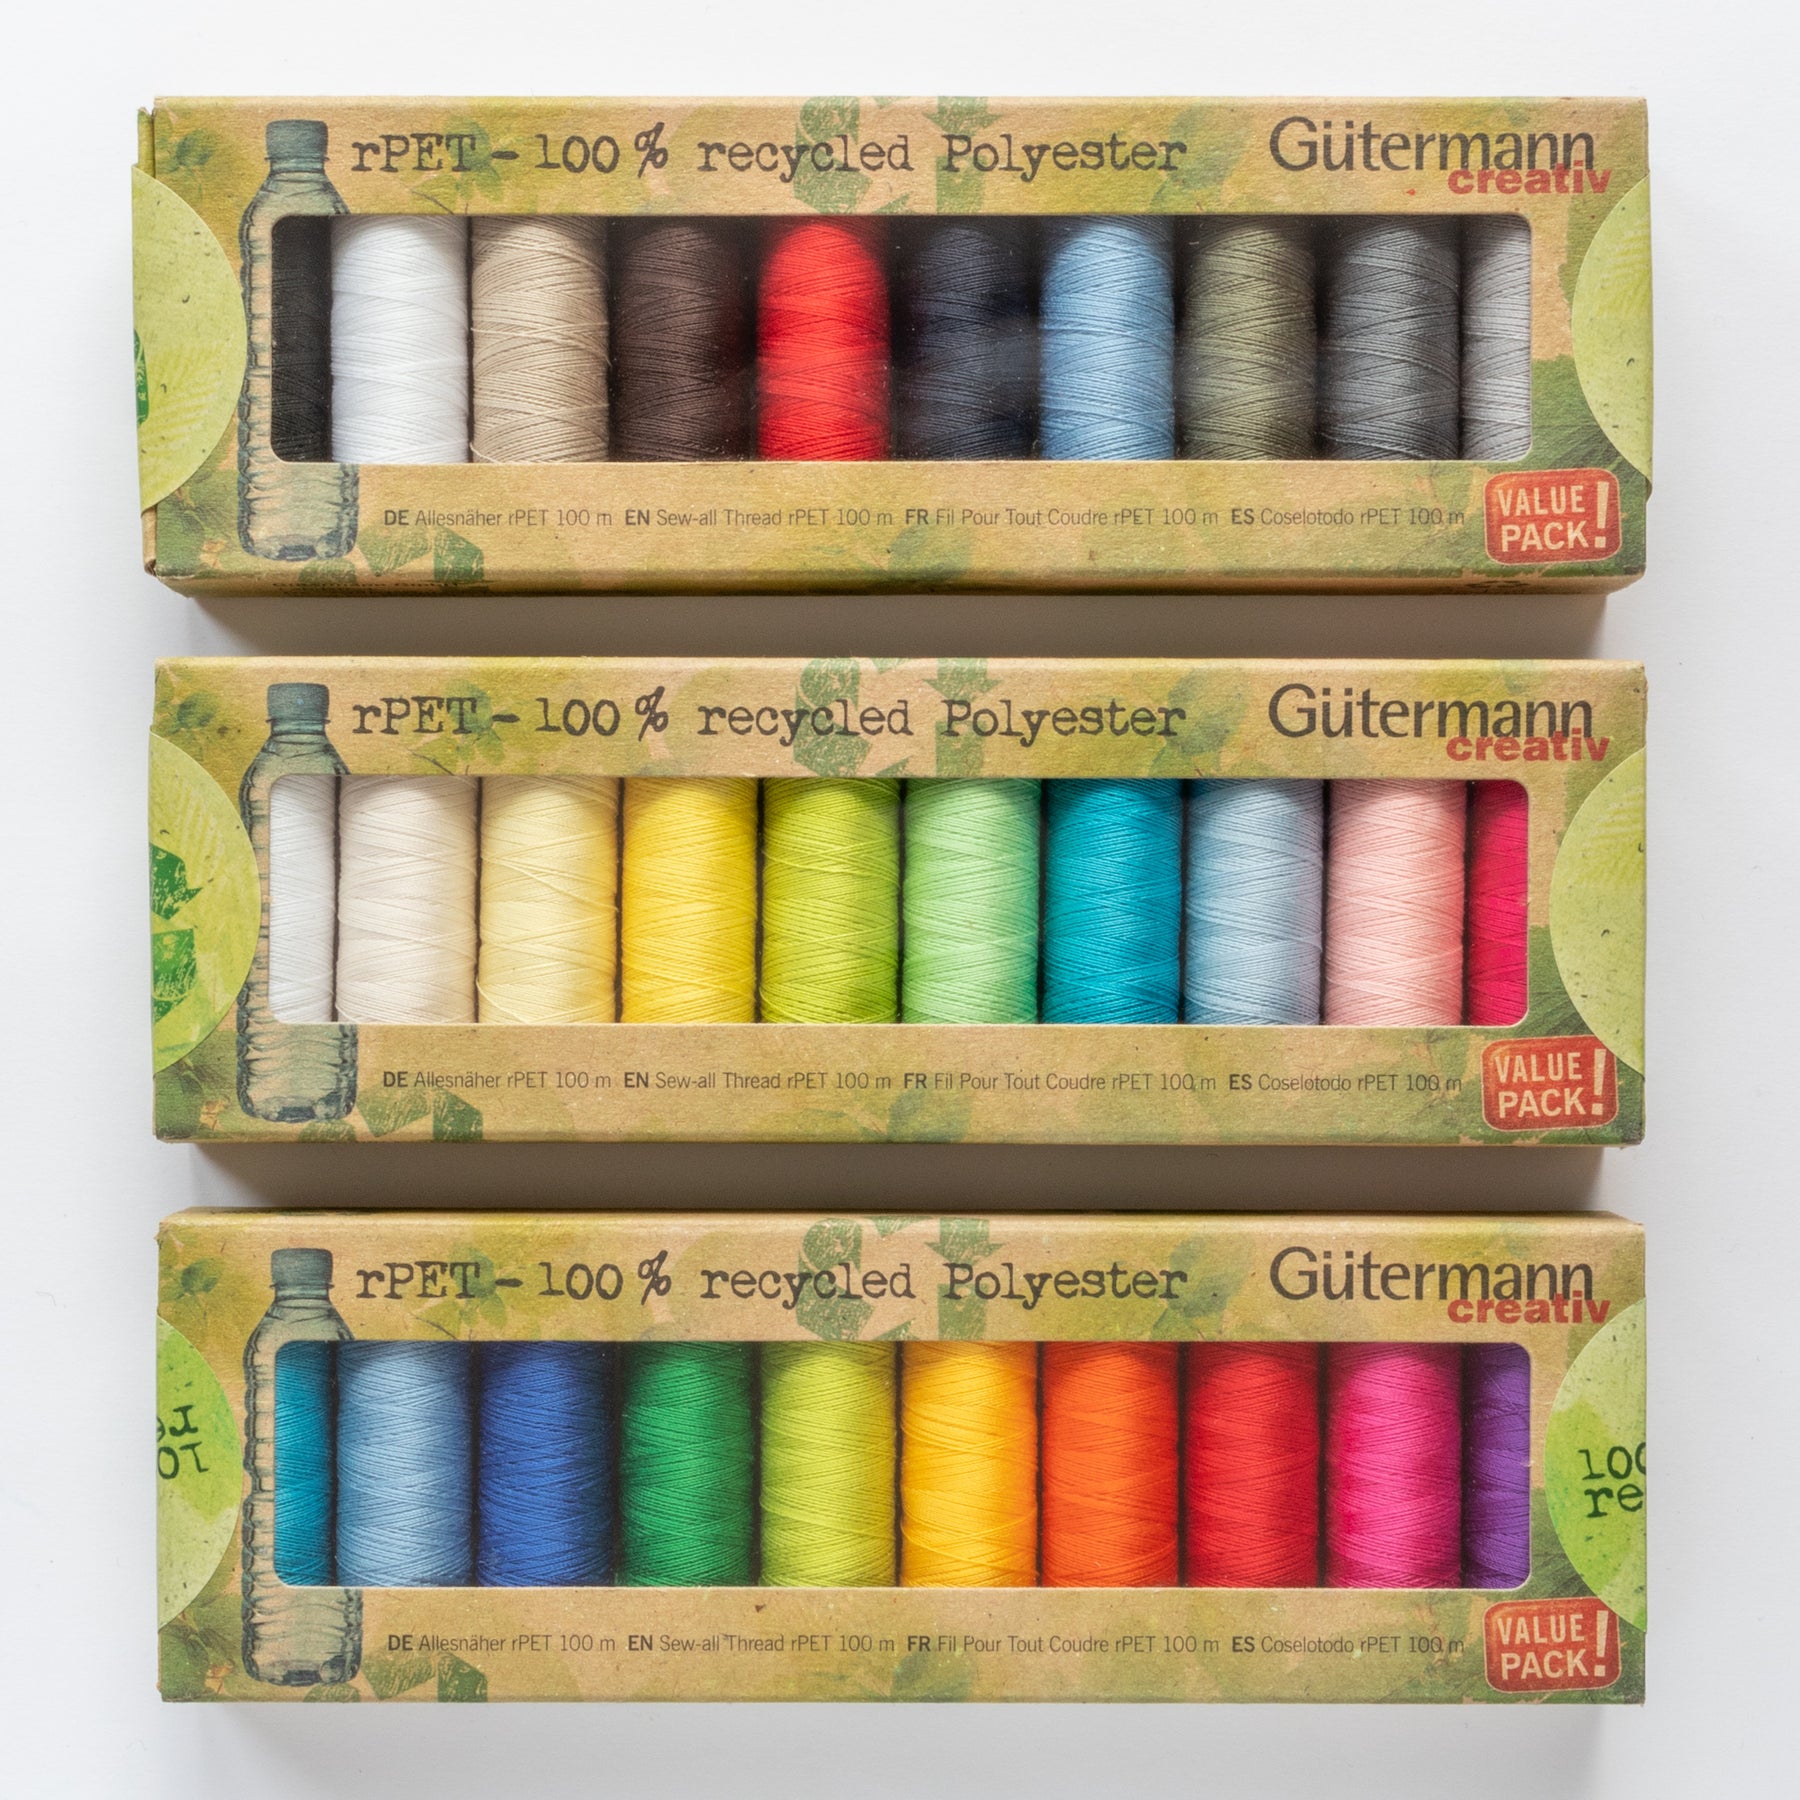 Gutermann Sewing Thread, Set of 10 Pastel Colors, Polyester Sewing